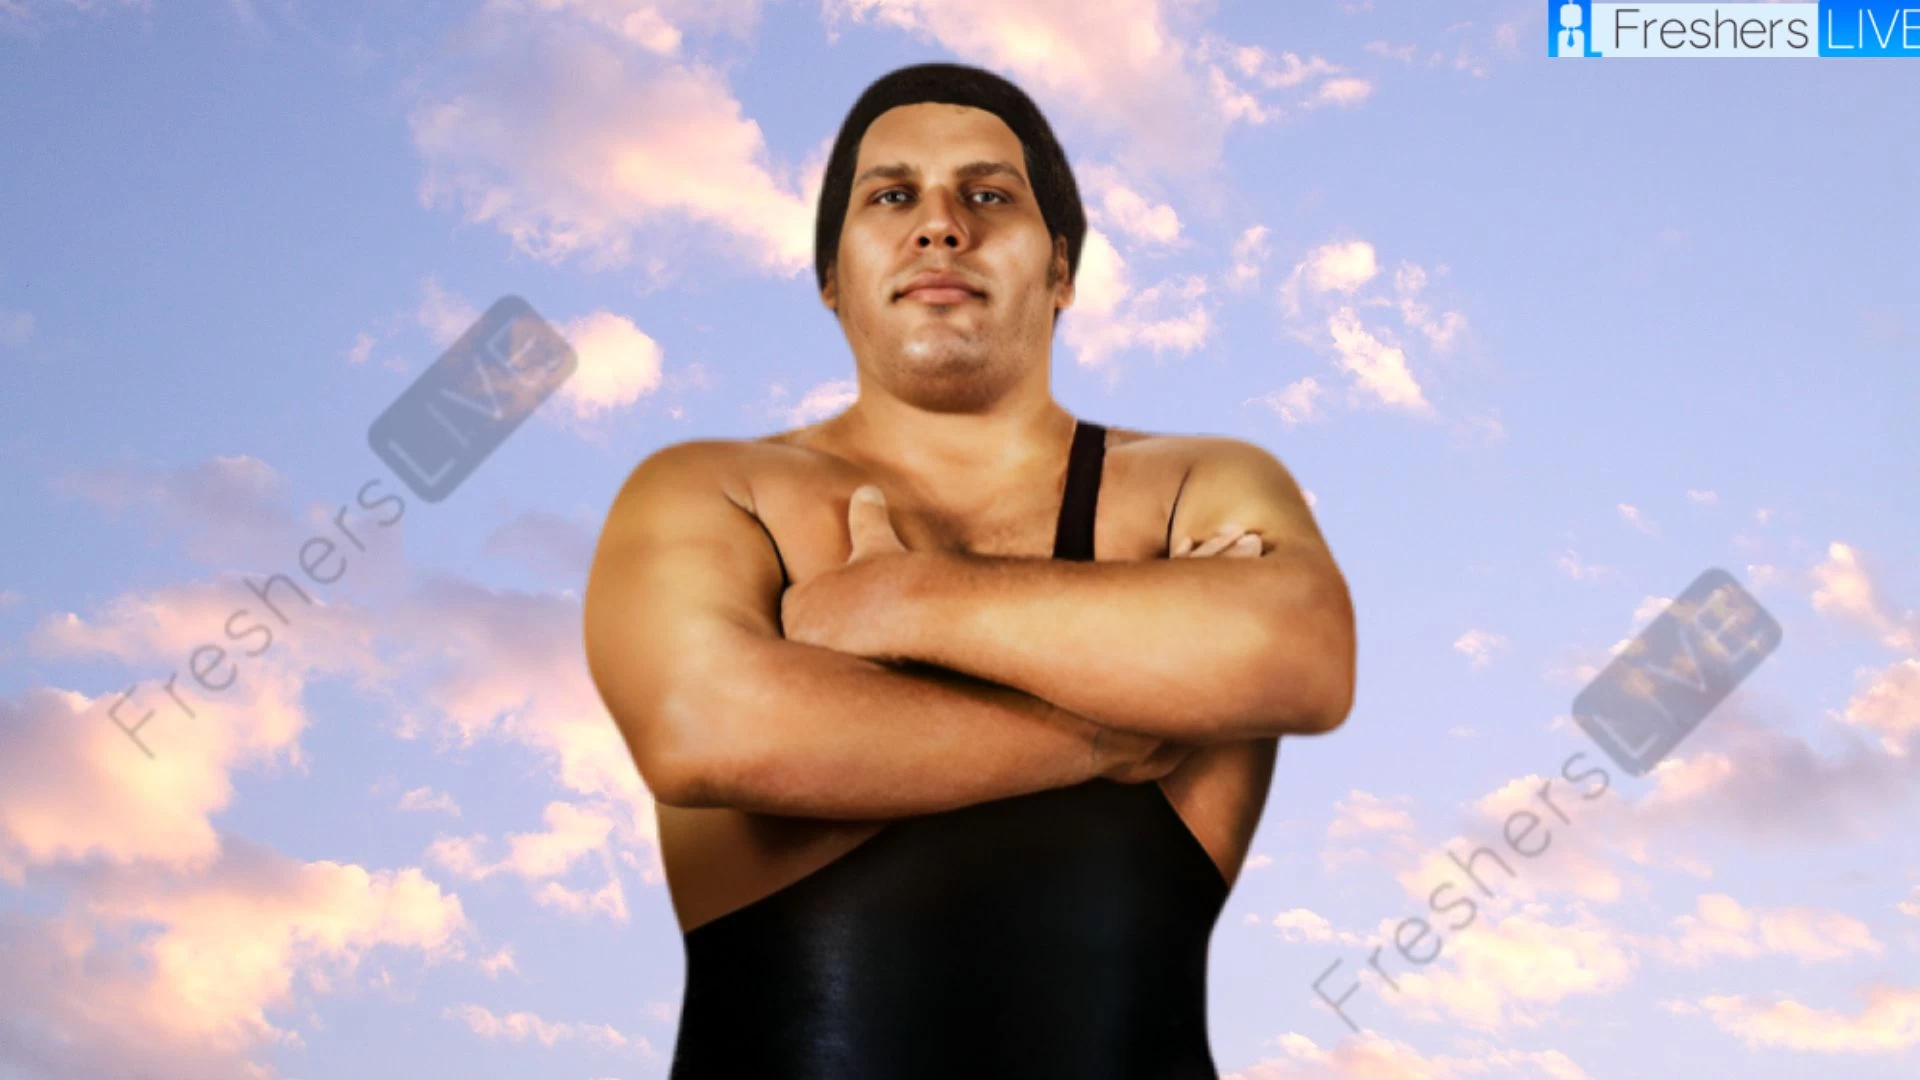 Andre The Giant Height How Tall is Andre The Giant?